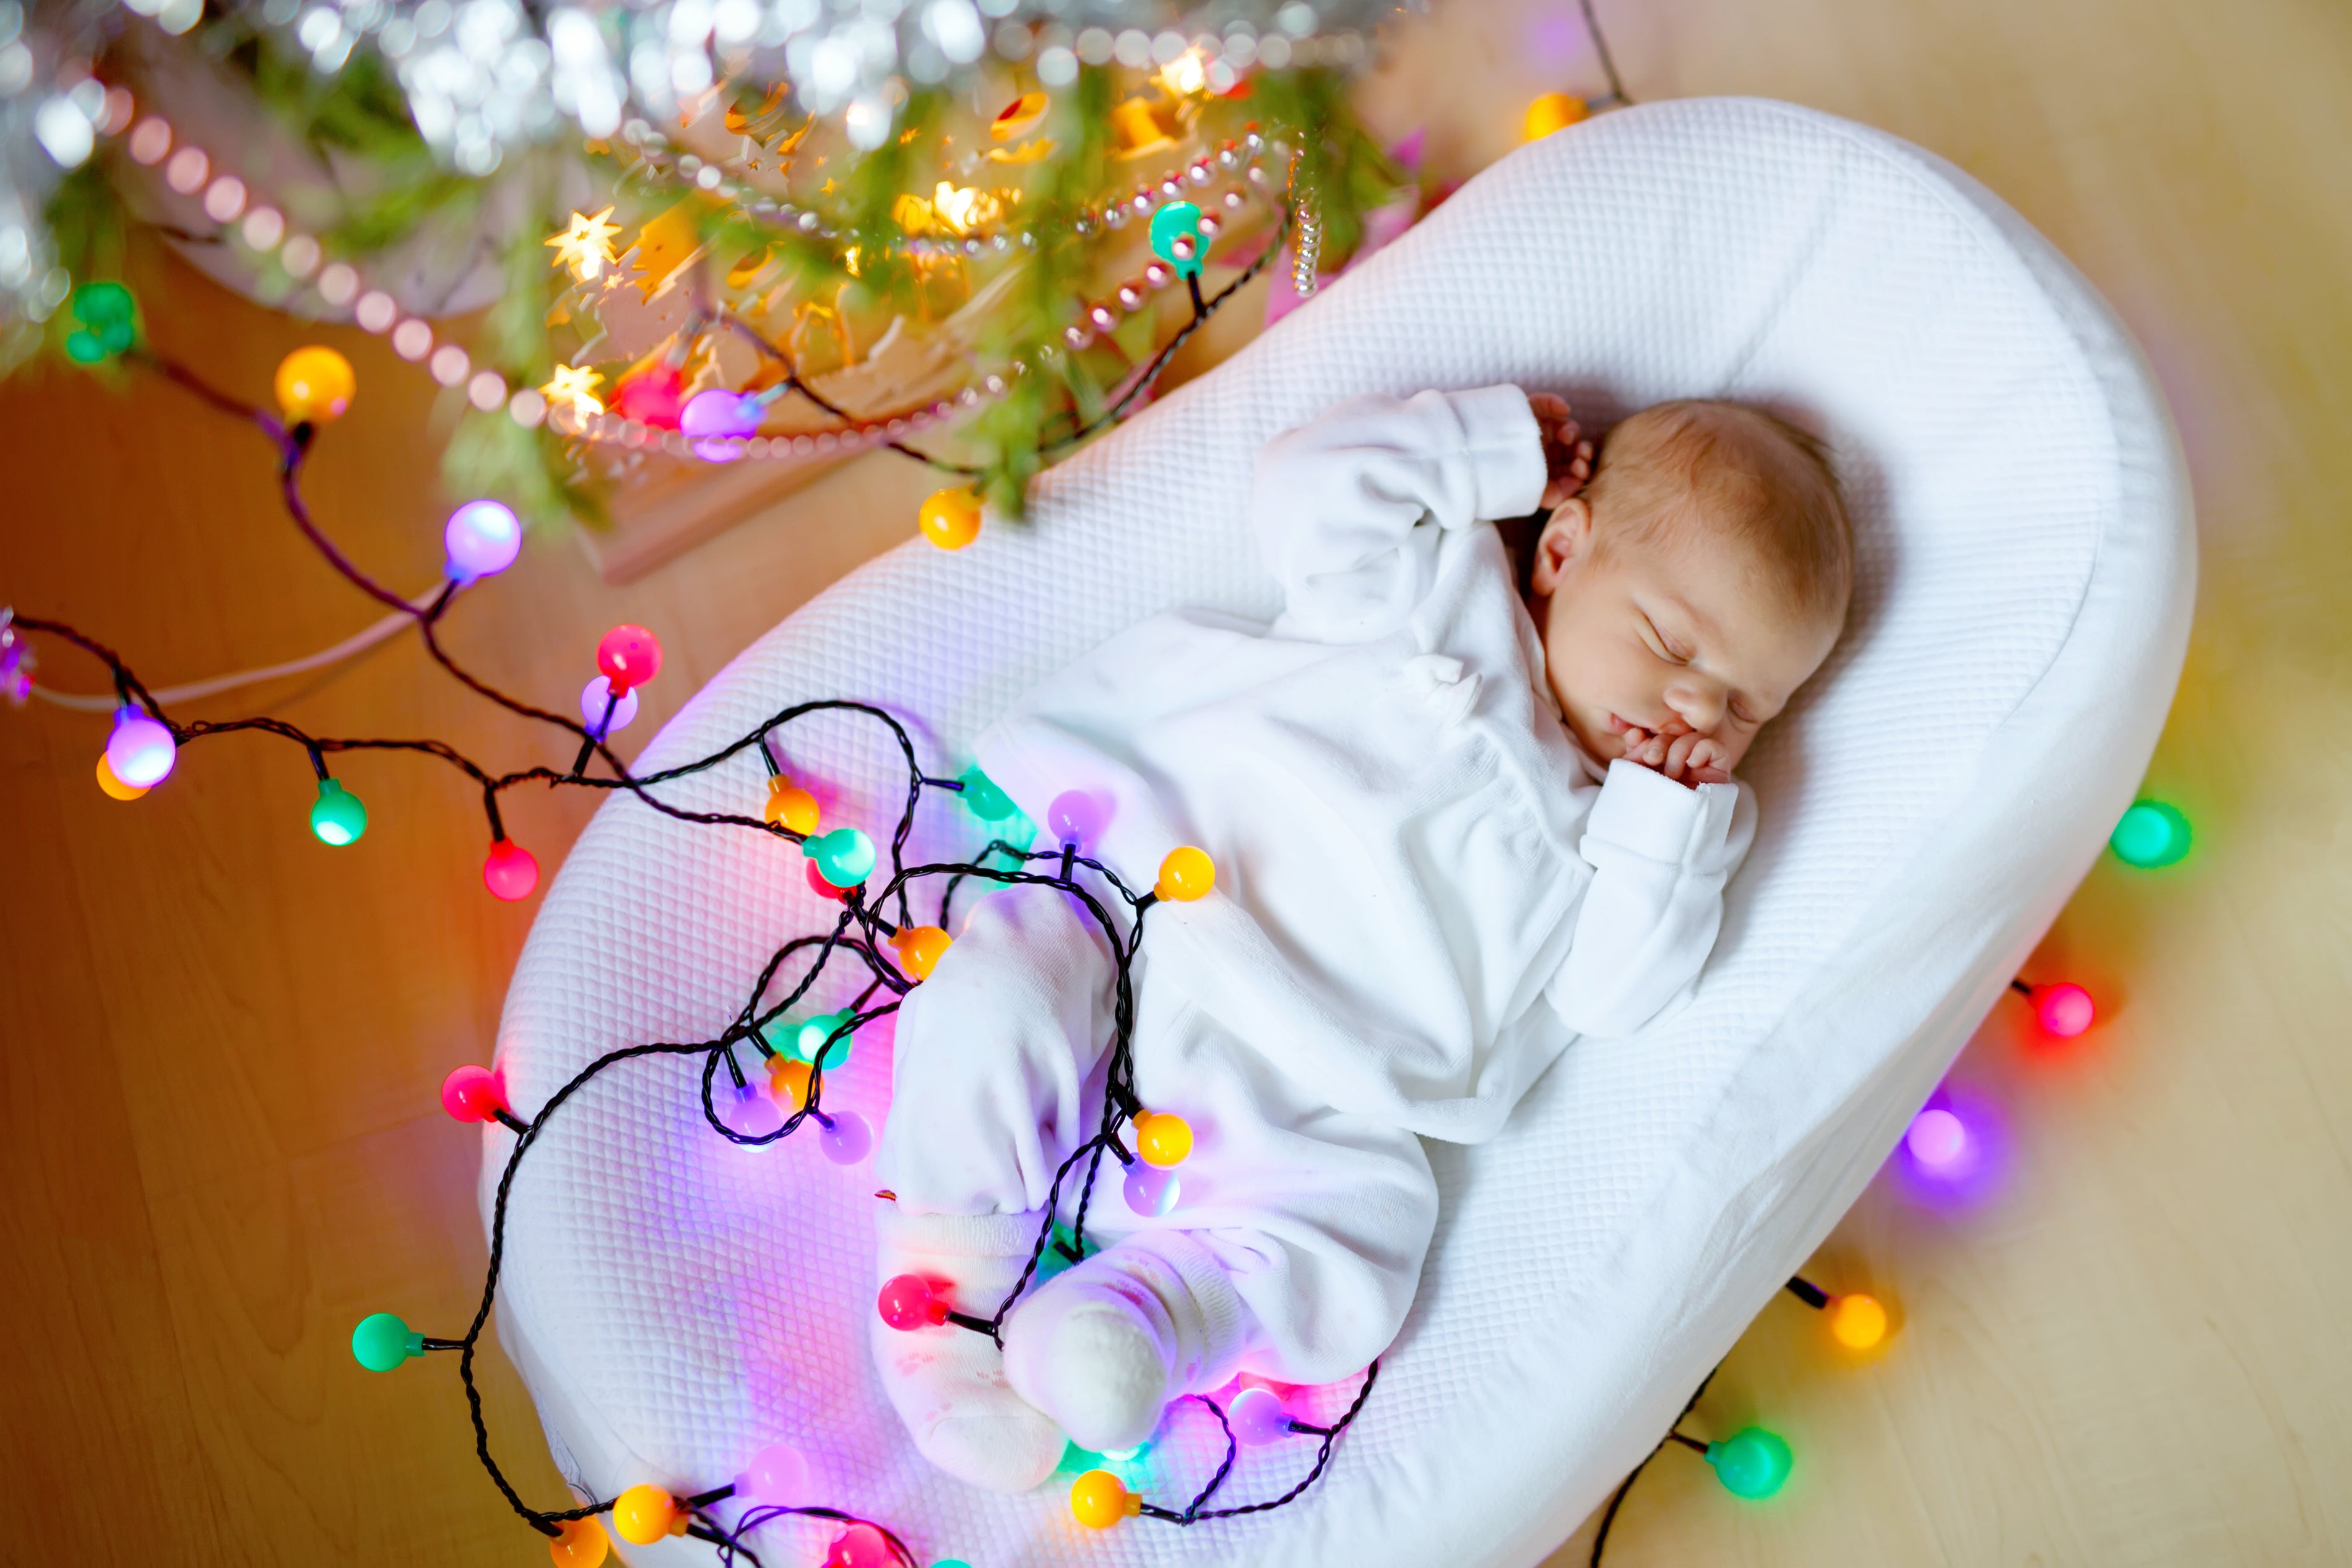 Top 5 Baby Christmas Gifts You'll Never Forget